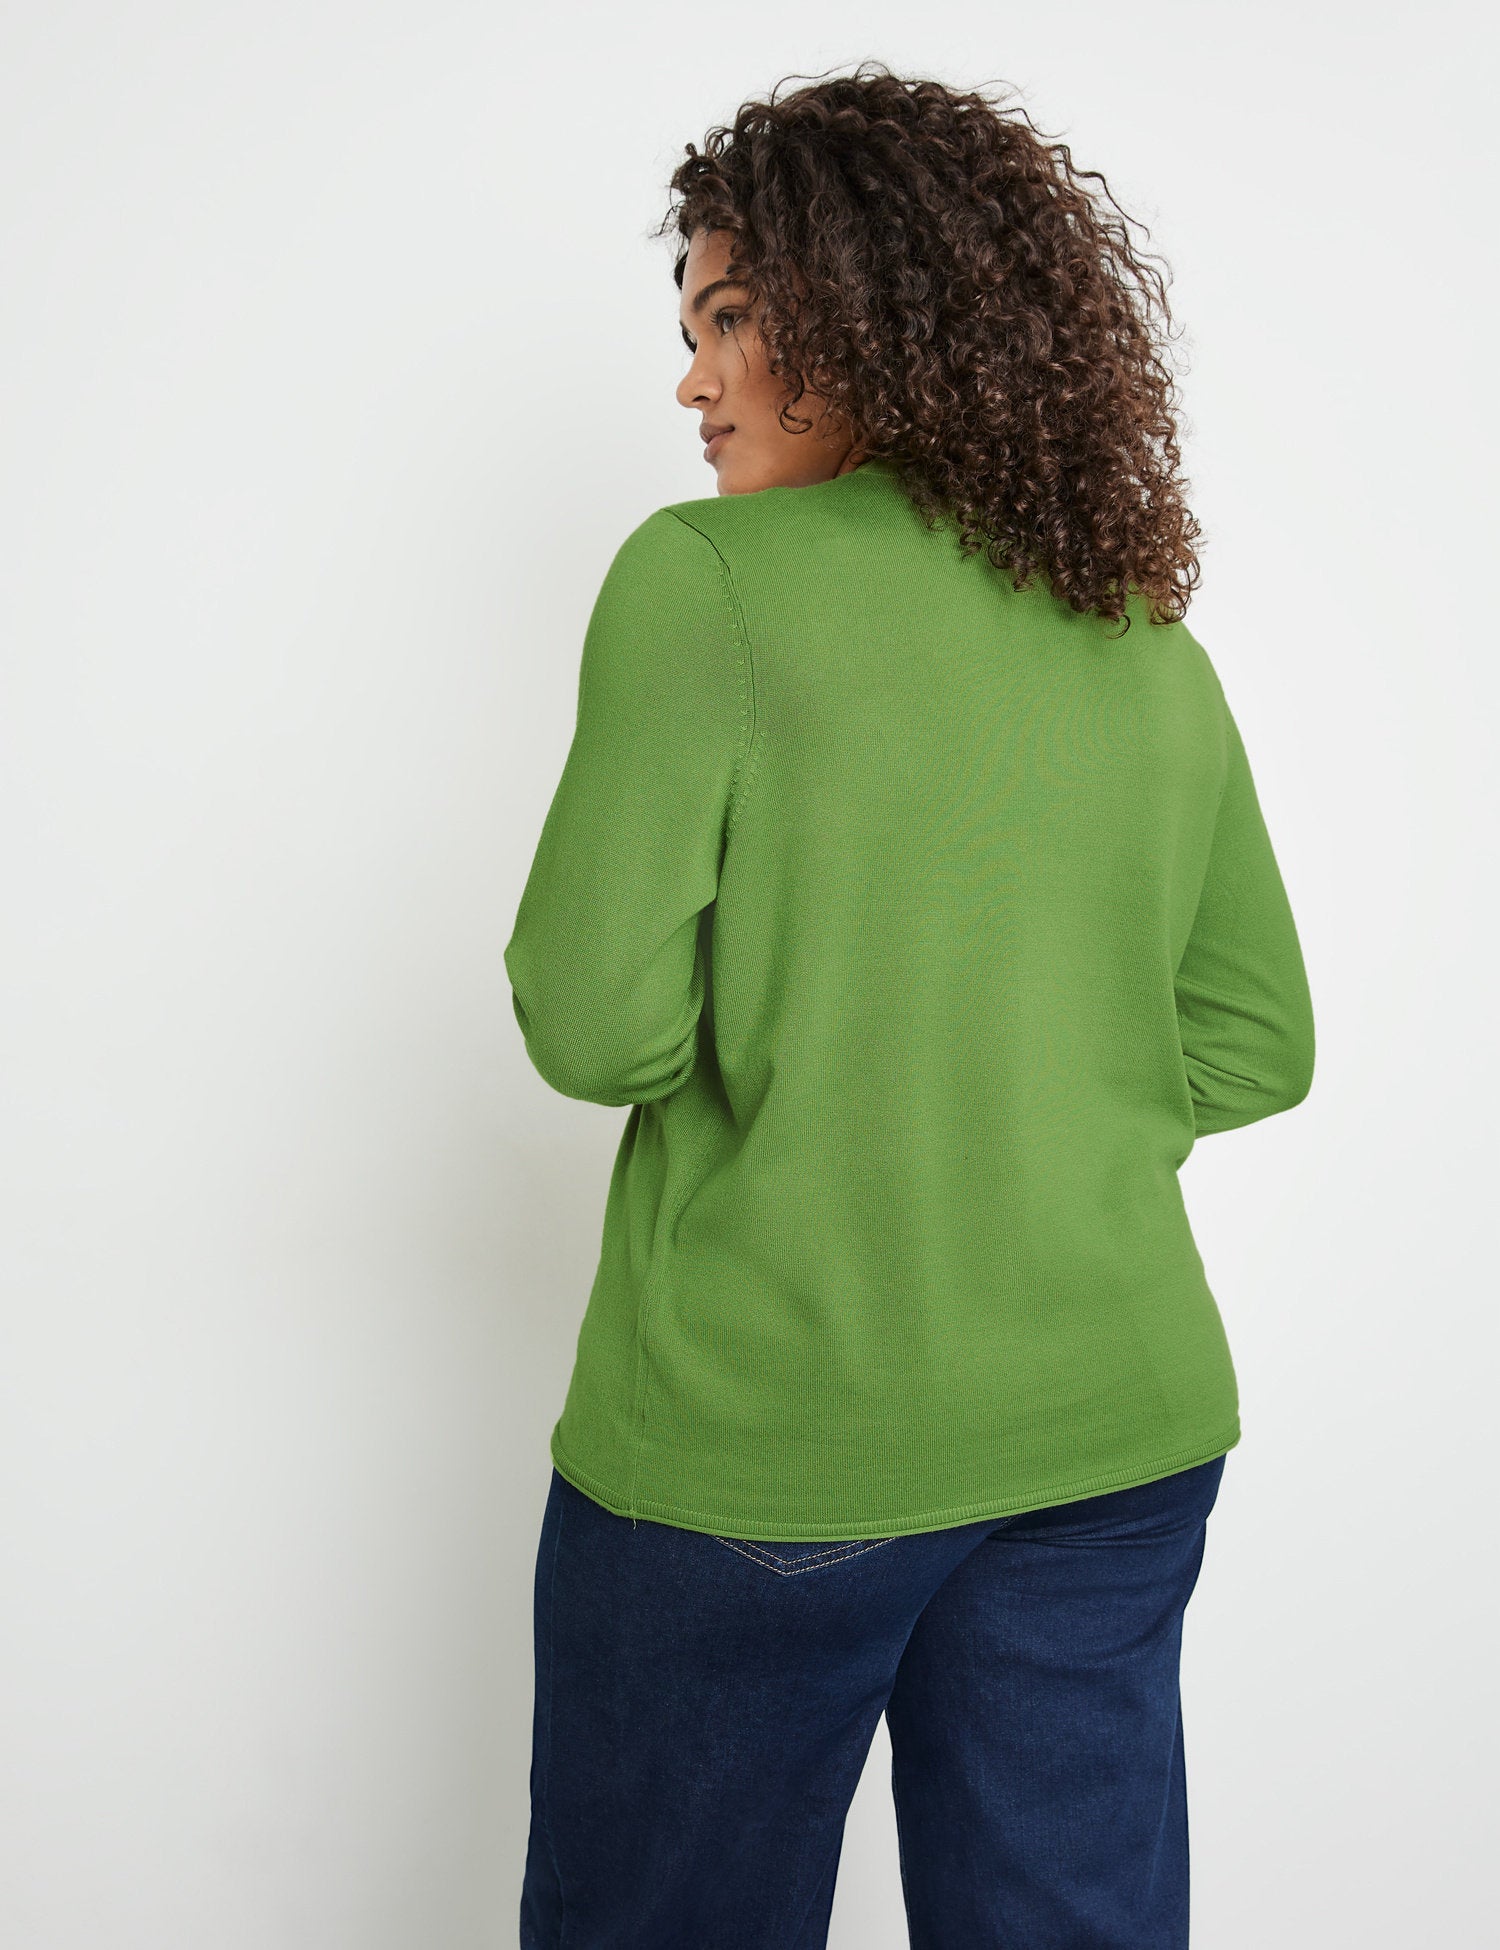 Fine Knit Jumper With Gathers On The Sleeves_372217-25400_5560_06